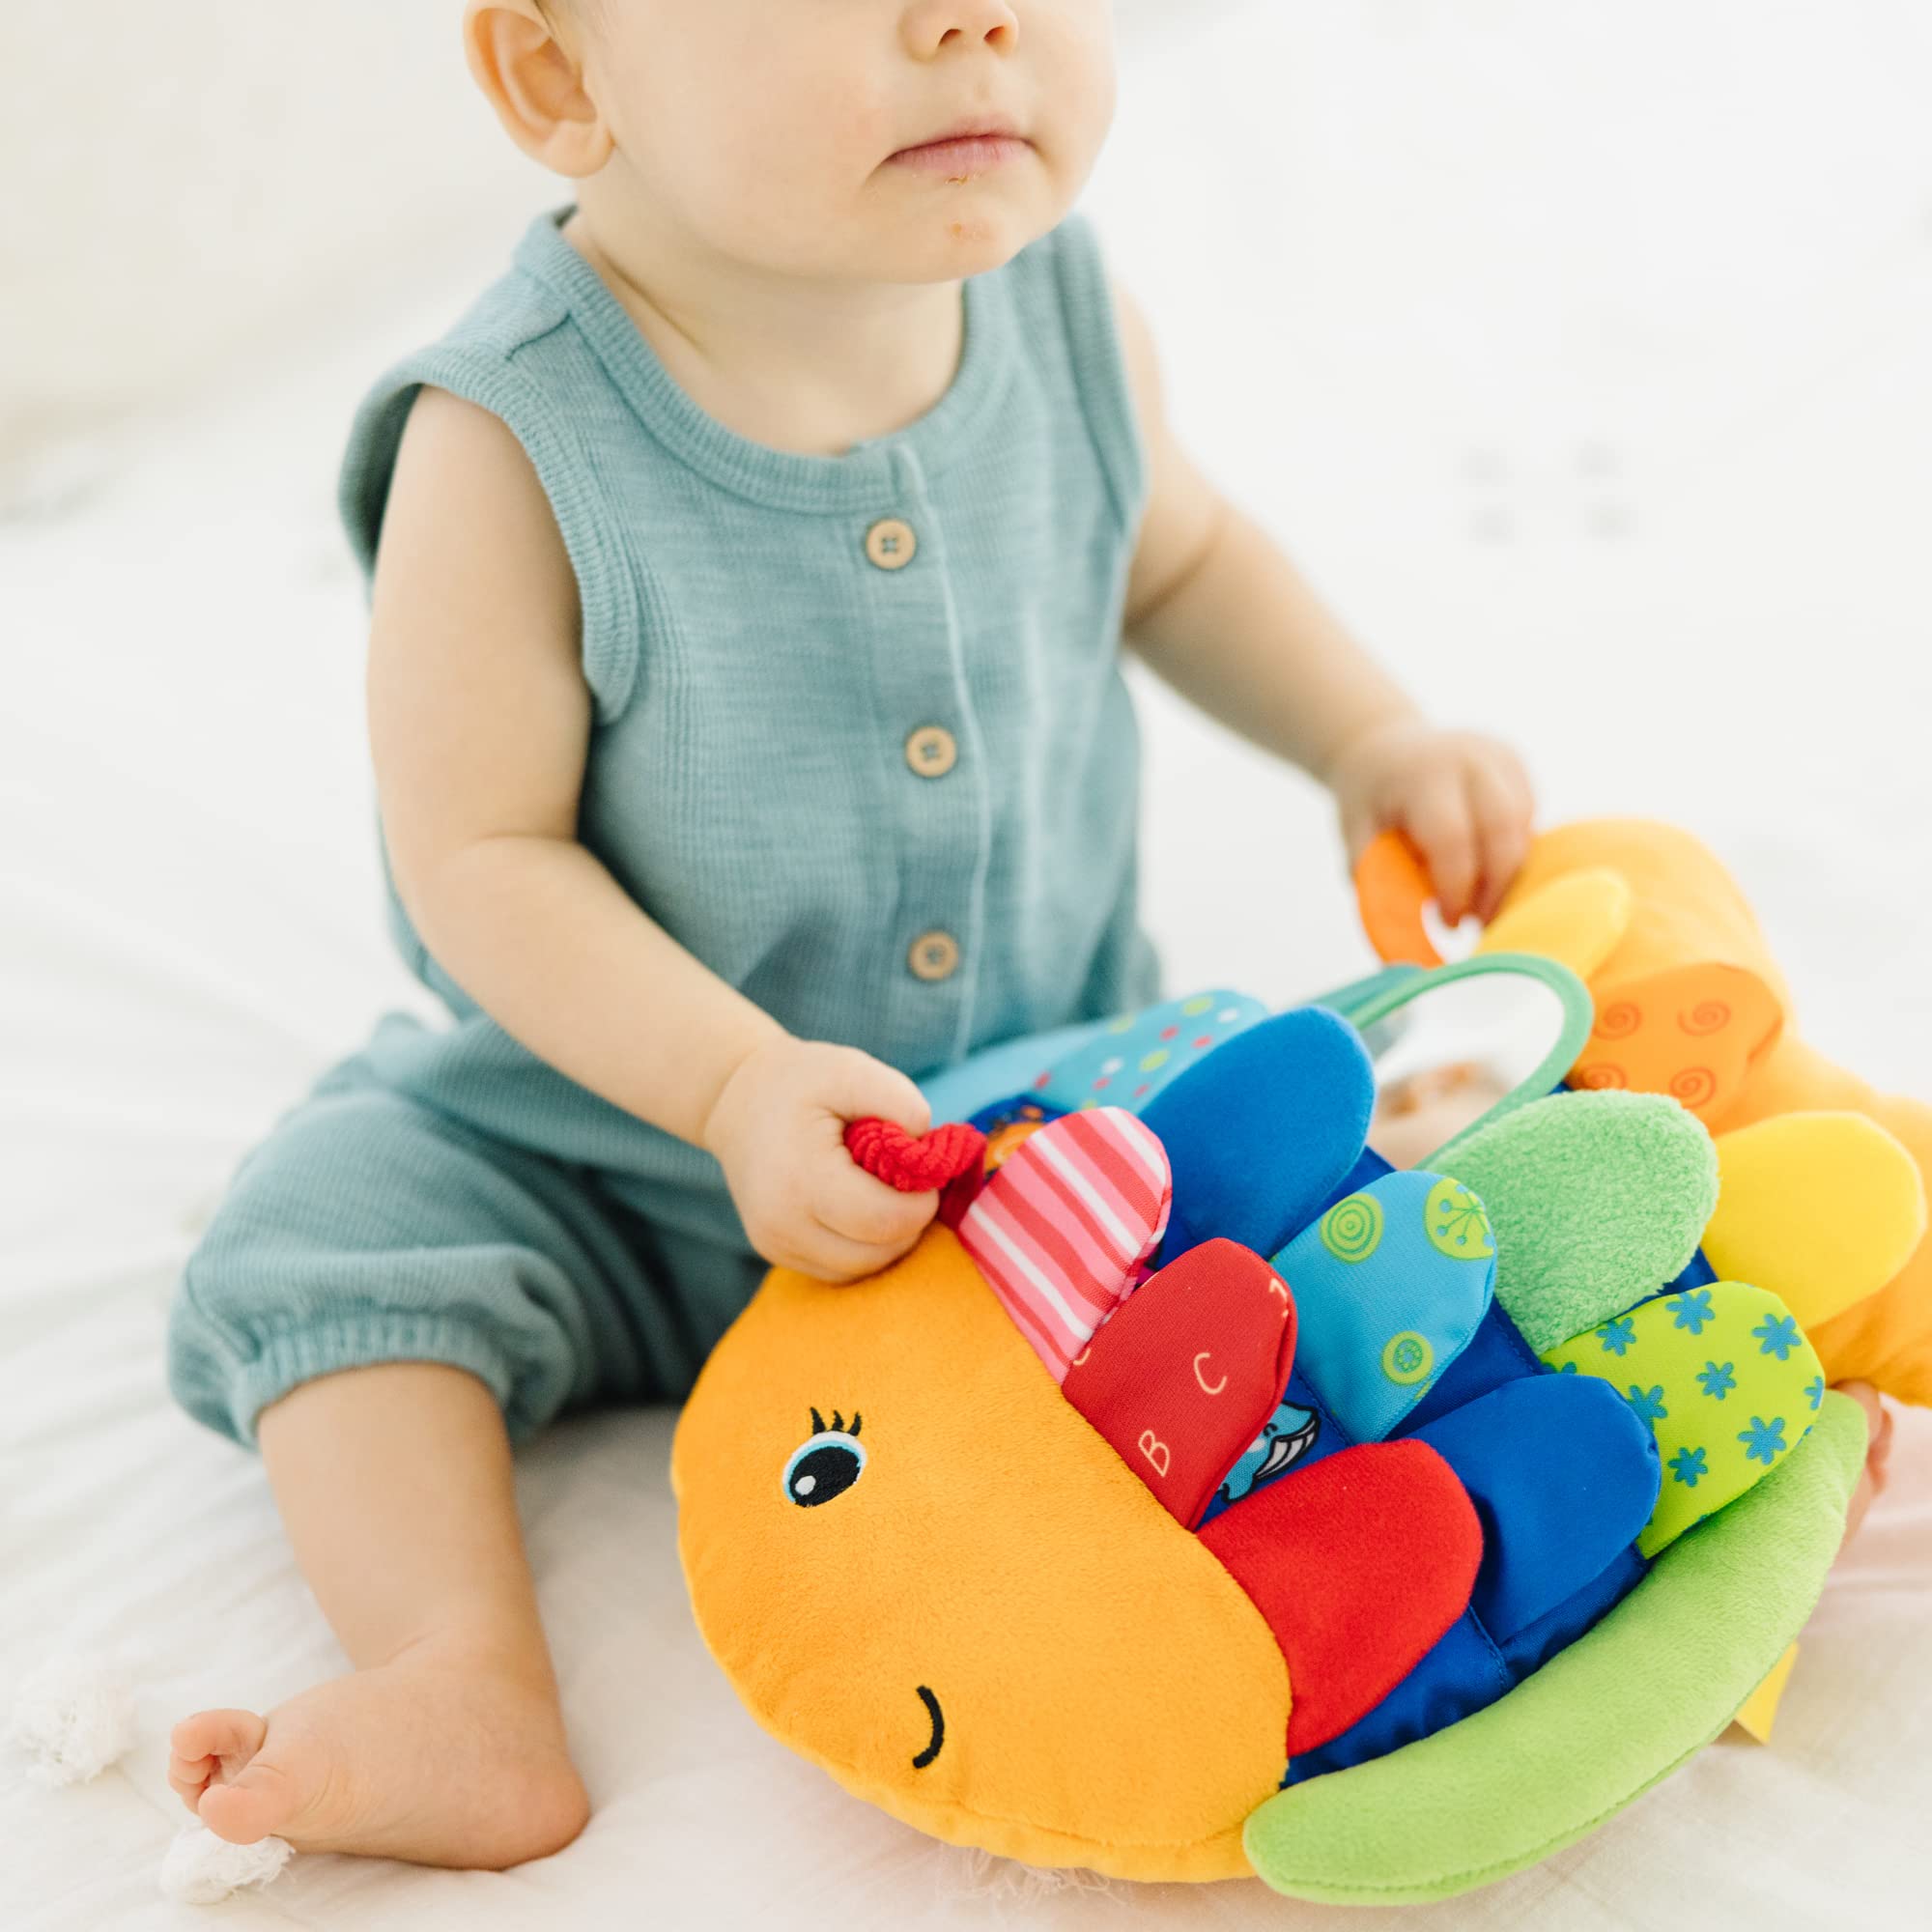 Melissa & Doug Flip Fish Soft Baby Toy - Tummy Time Sensory Toy with Taggies for Infants